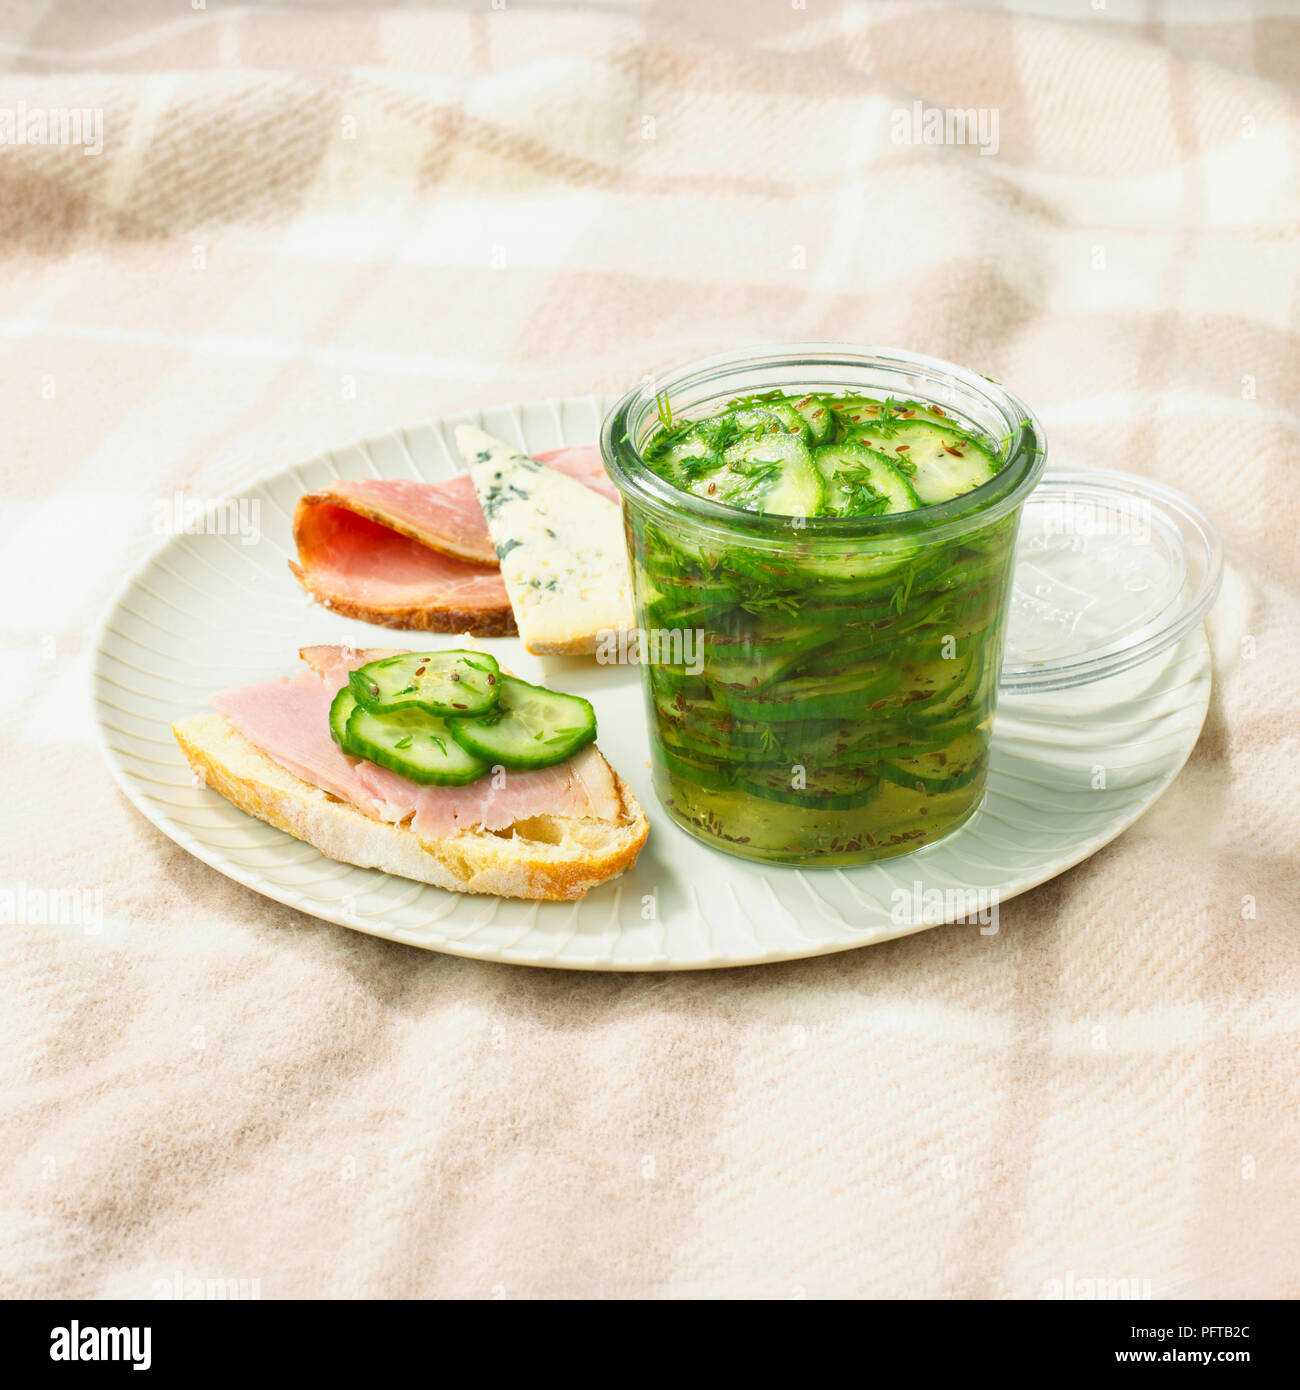 Cucumber and dill pickle Stock Photo